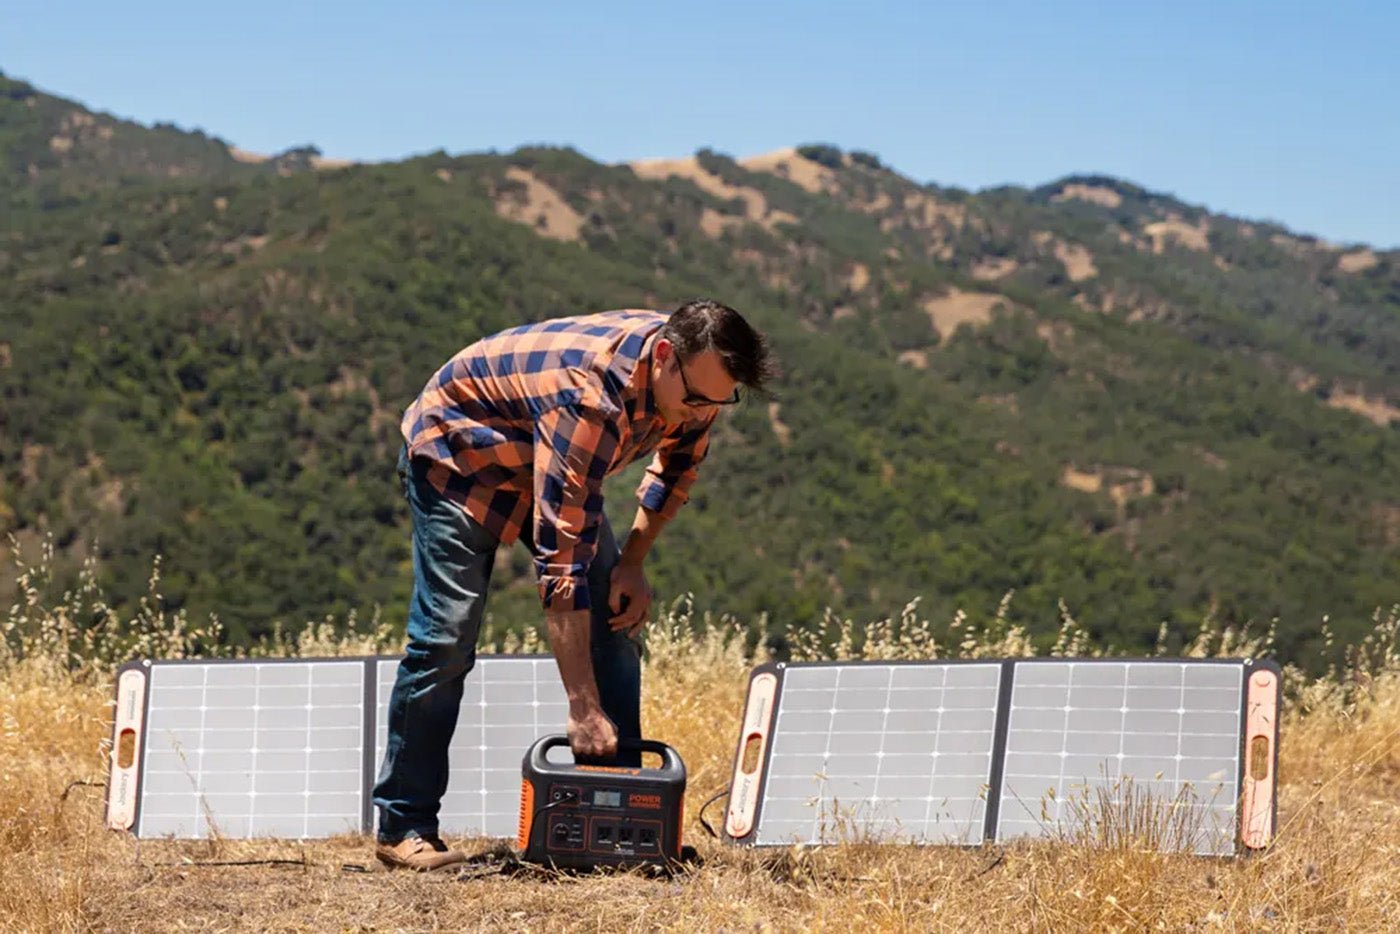 Jackery Explorer 880 Portable Power Station - Charging Outside With Solar Panels